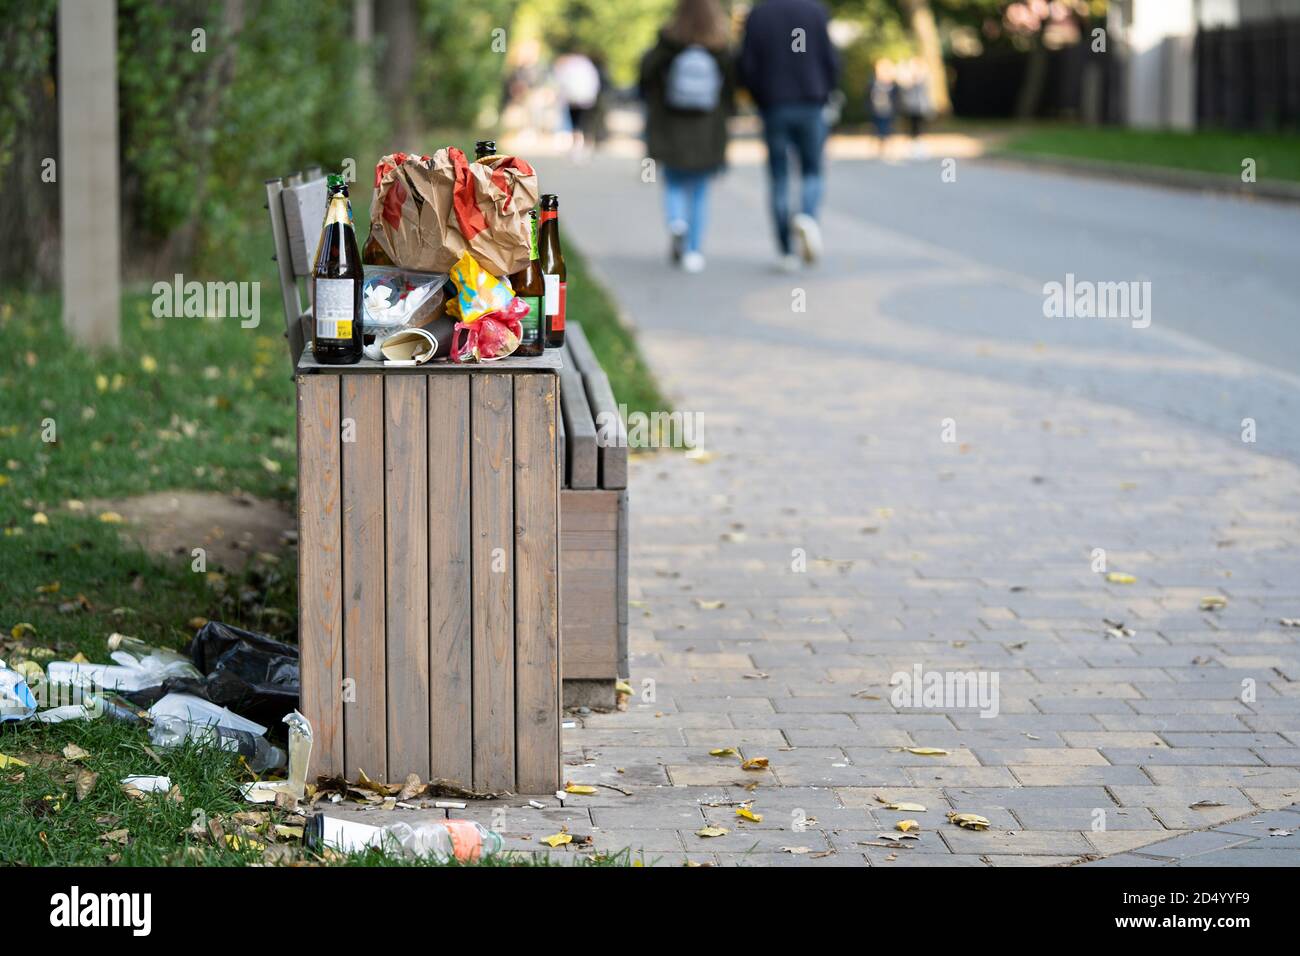 https://c8.alamy.com/comp/2D4YYF9/overcrowded-trash-basket-in-the-street-garbage-bin-a-pile-of-plastic-waste-trash-on-the-floor-and-grass-2D4YYF9.jpg